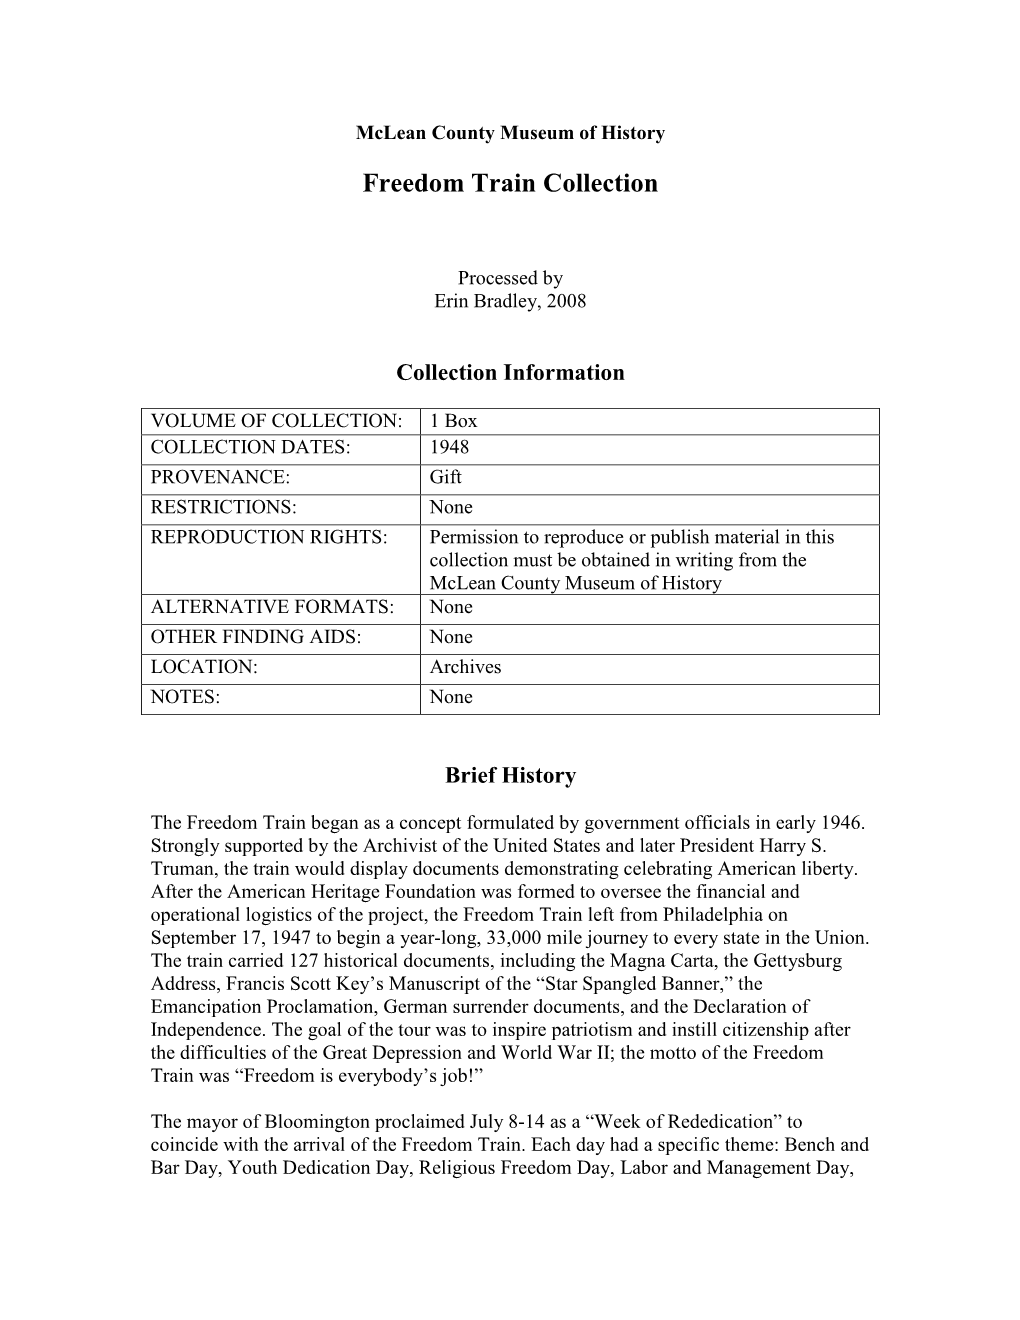 Freedom Train Collection